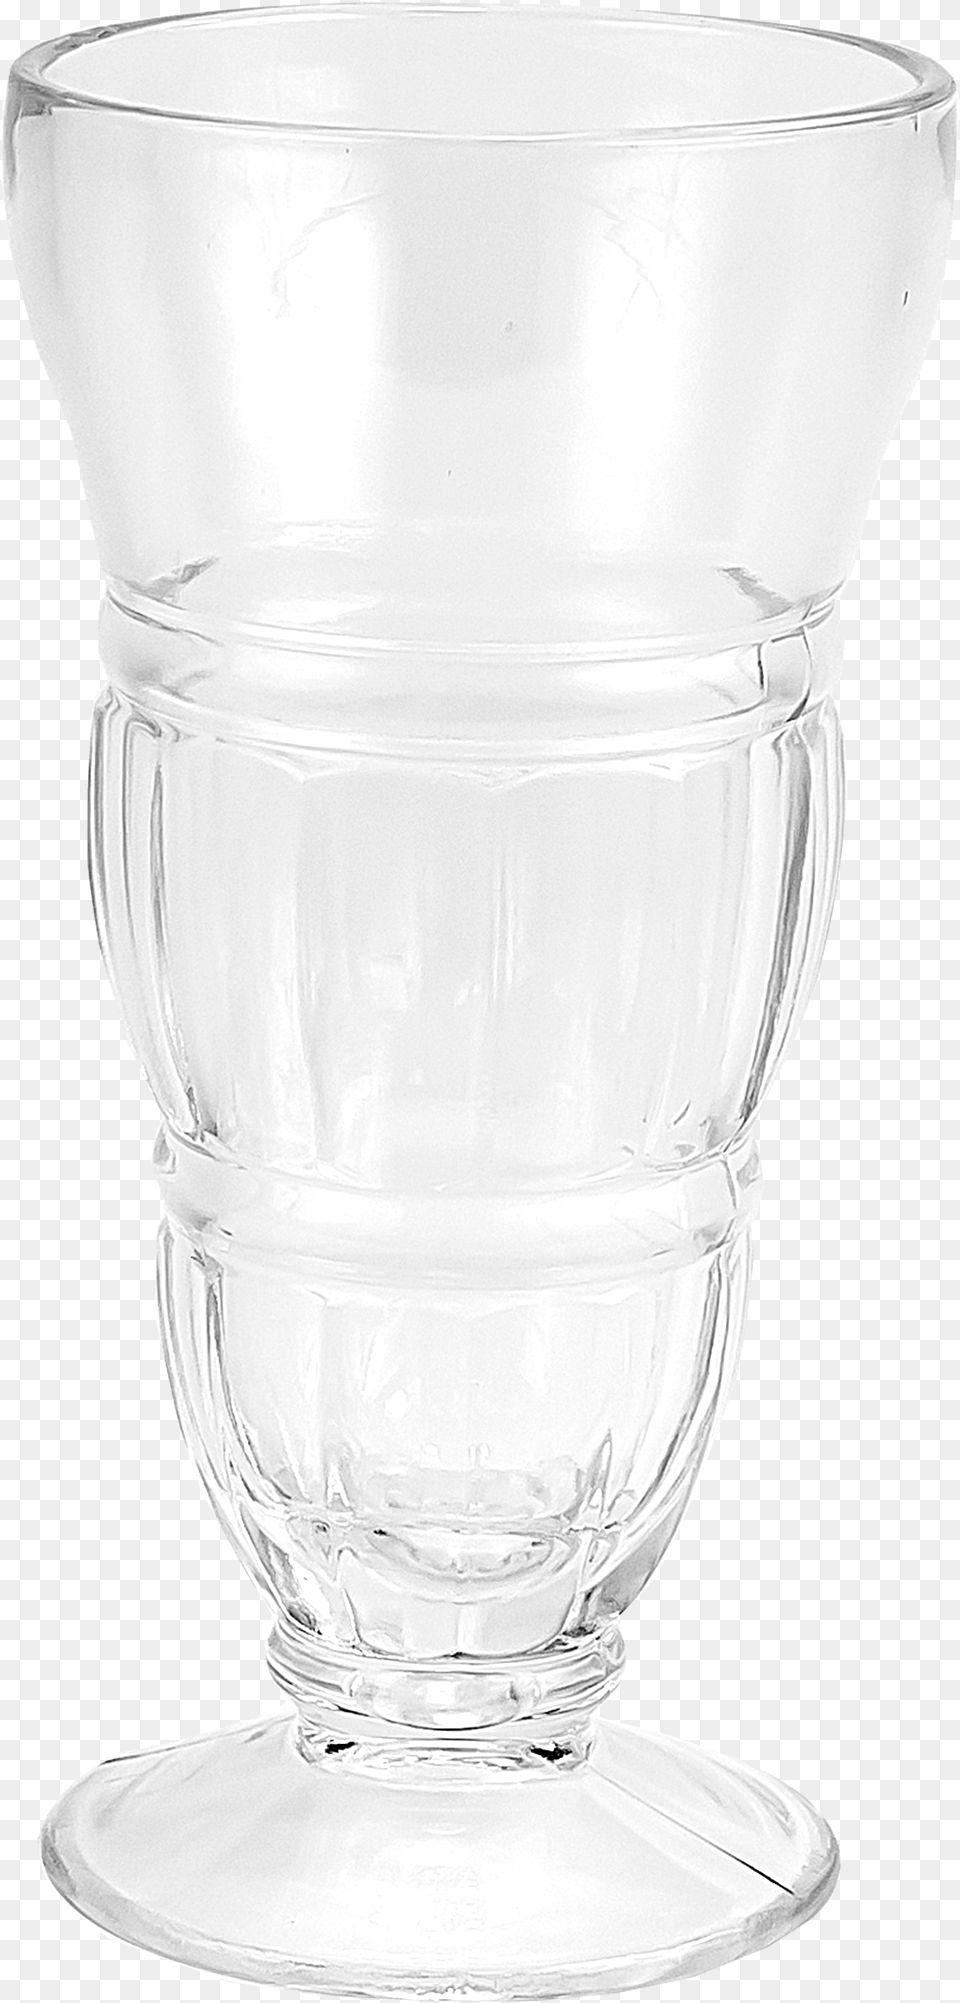 Champagne Glass Download Champagne Glass, Bowl, Mixing Bowl, Bottle, Shaker Free Png